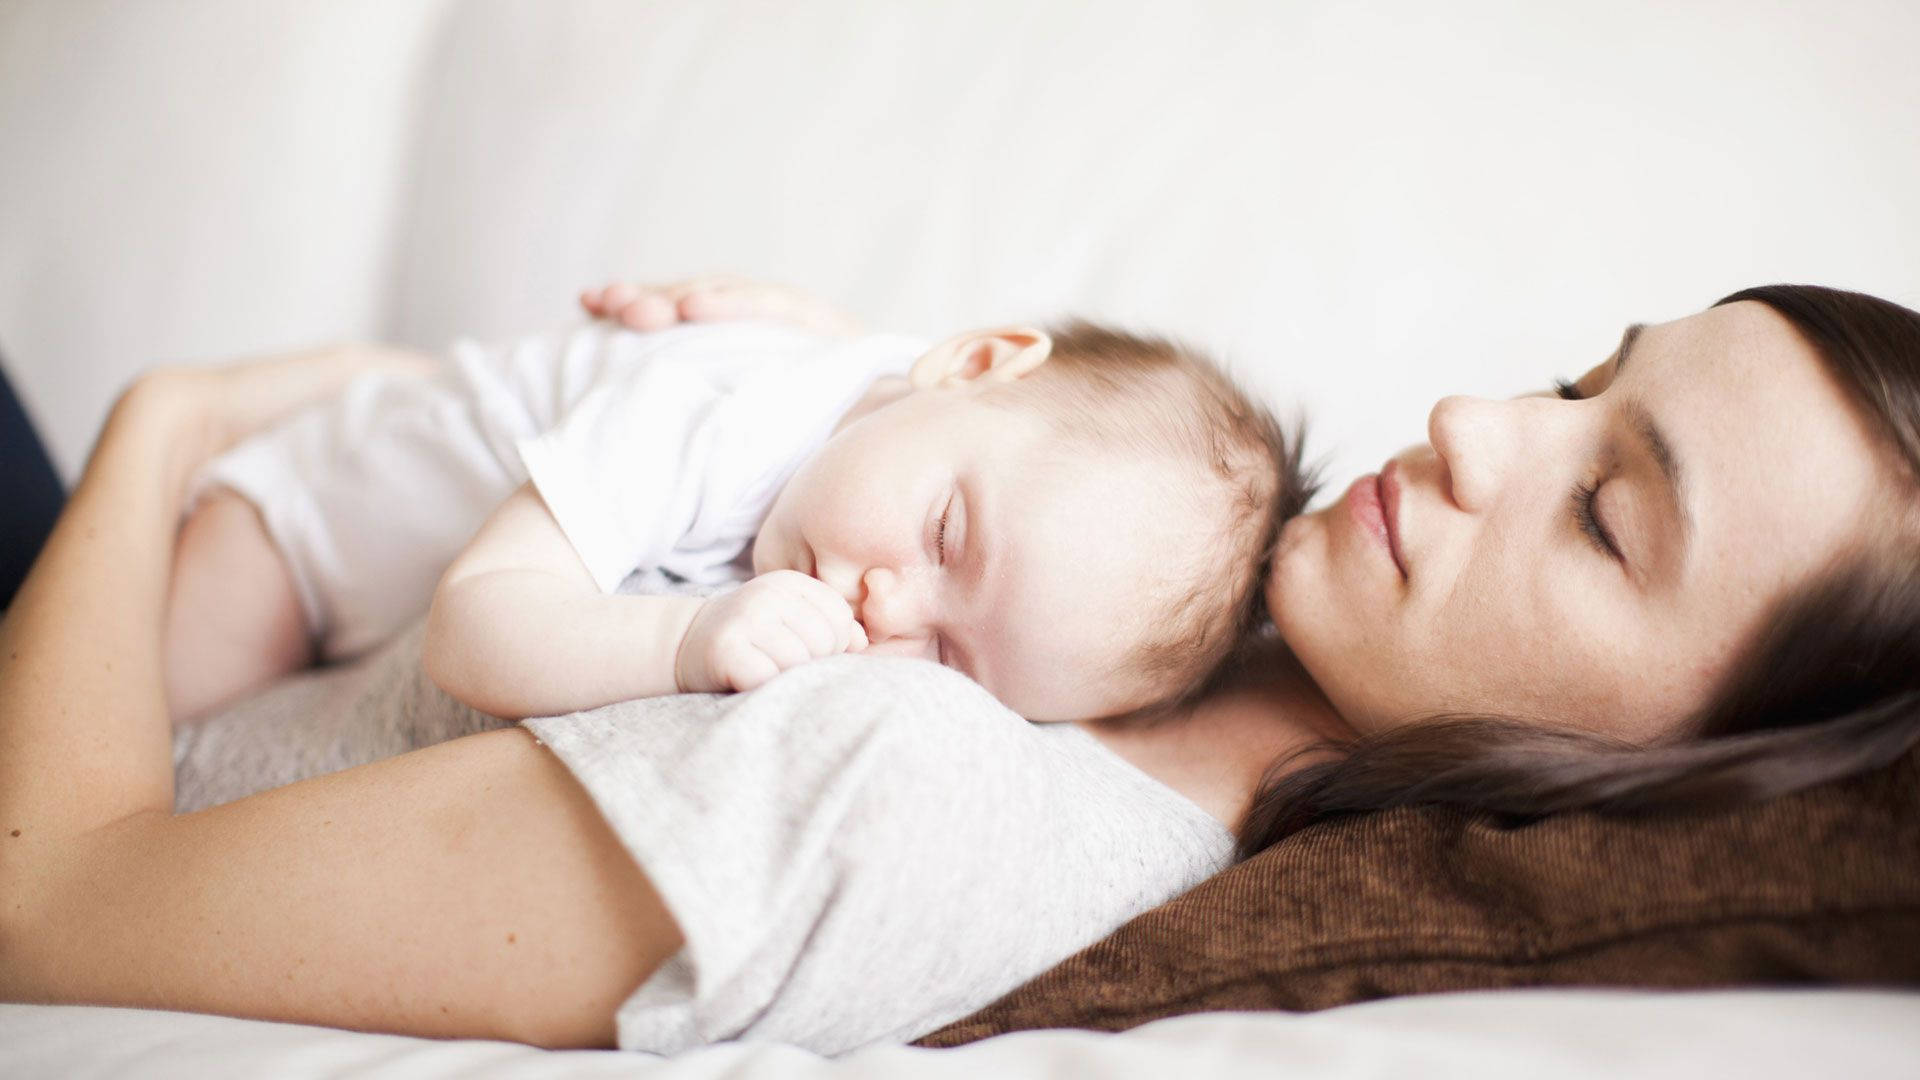 Mom and Son Napping Wallpaper